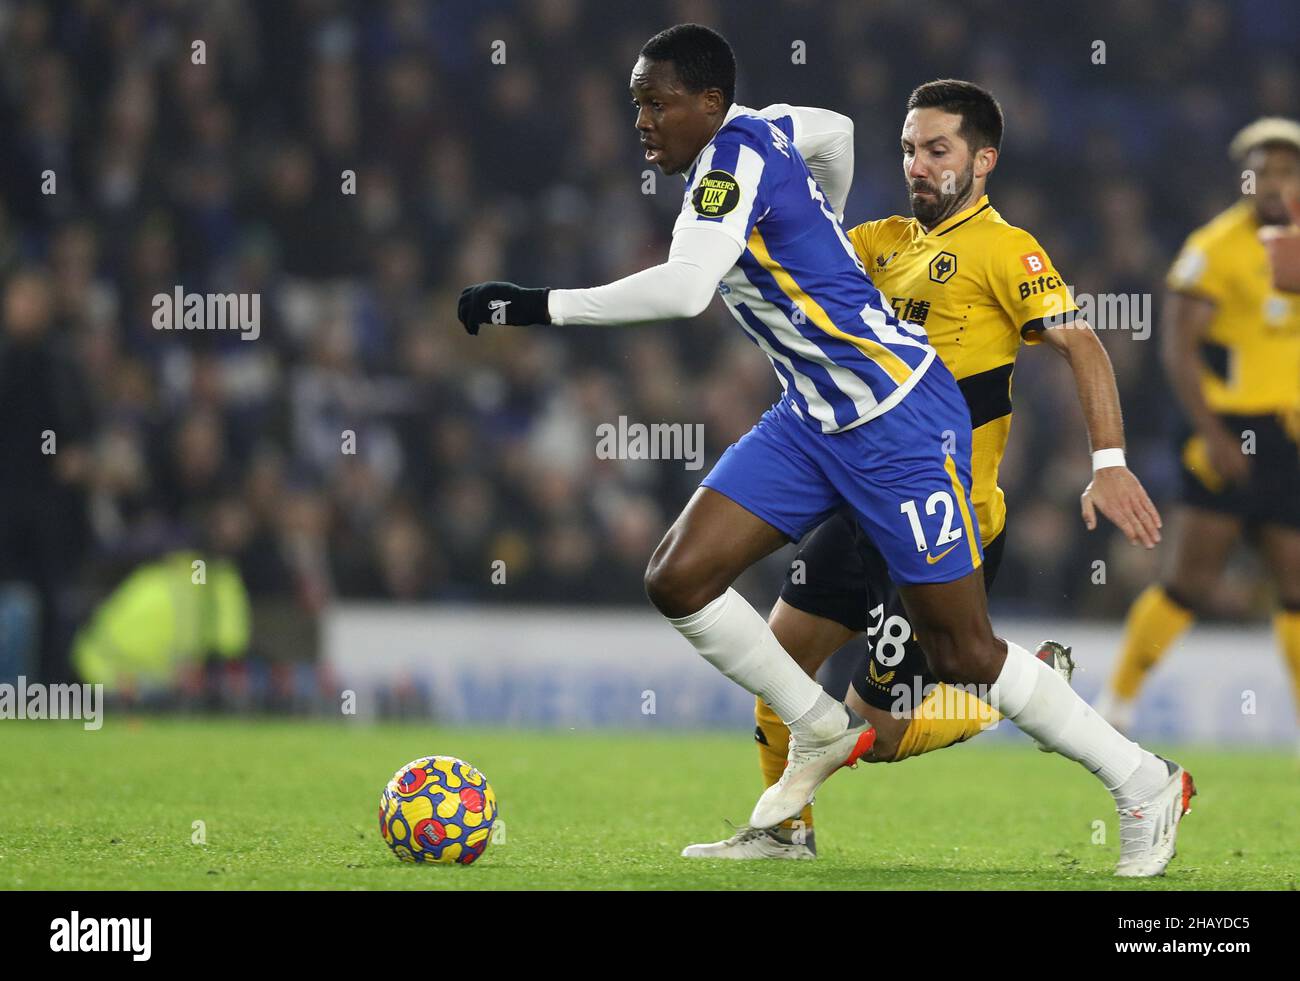 Brighton and Hove, England, 15th December 2021. Enock Mwepu of Brighton and Hove Albion is challenged by João Moutinho of Wolverhampton Wanderers during the Premier League match at the AMEX Stadium, Brighton and Hove. Picture credit should read: Paul Terry / Sportimage Stock Photo